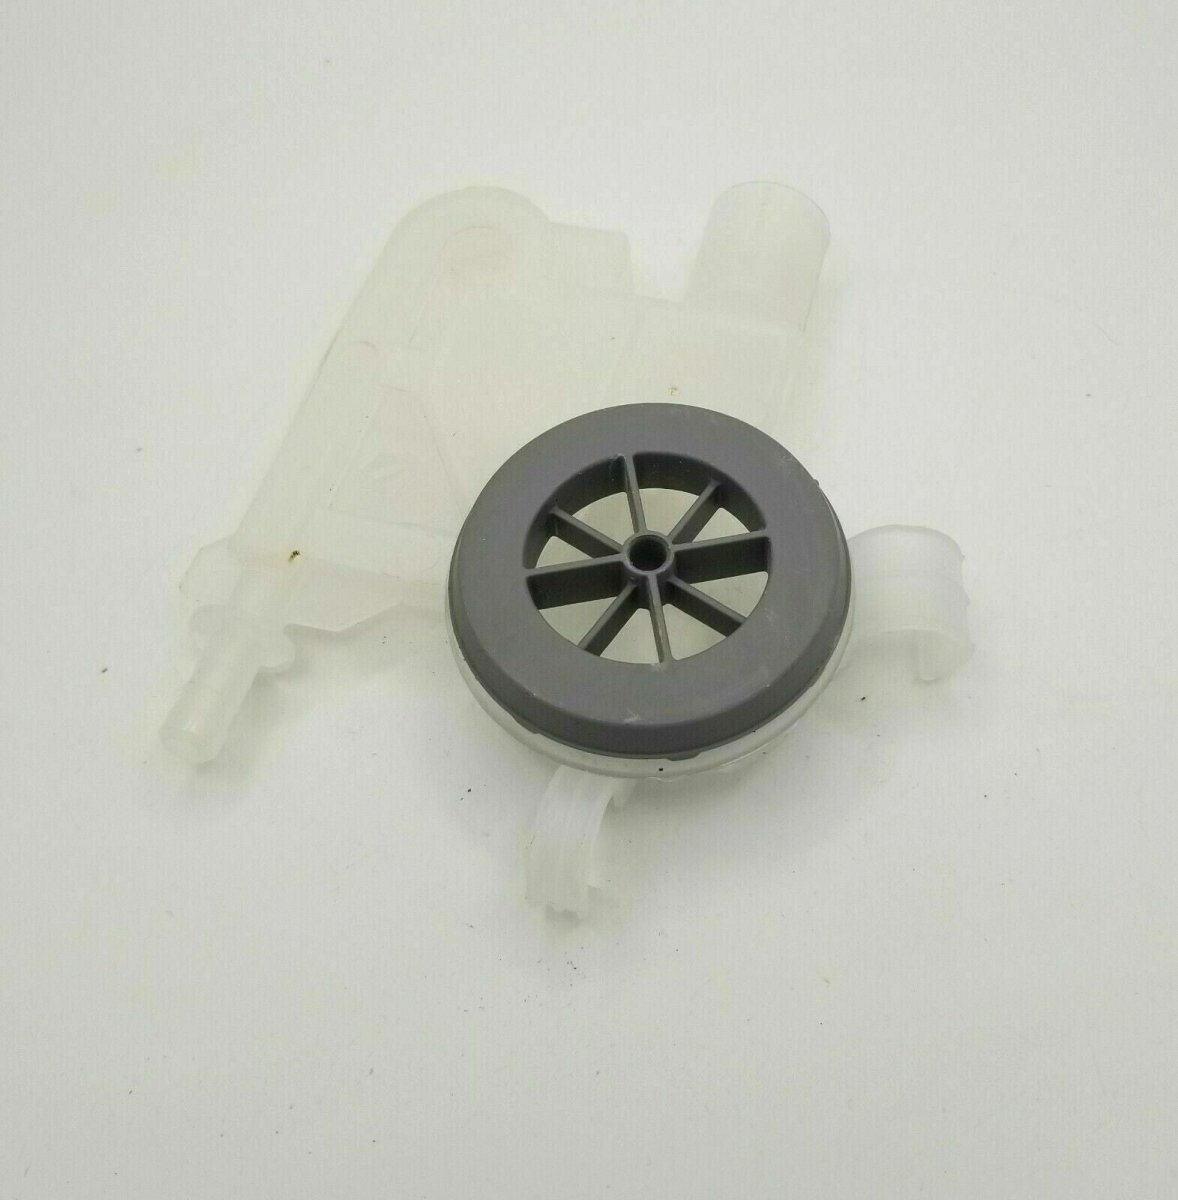 00645147 - 00634765 Bosch Dishwasher Water Inlet / Cover AP4339677, PS8730292 - ApplianceSolutionsHub